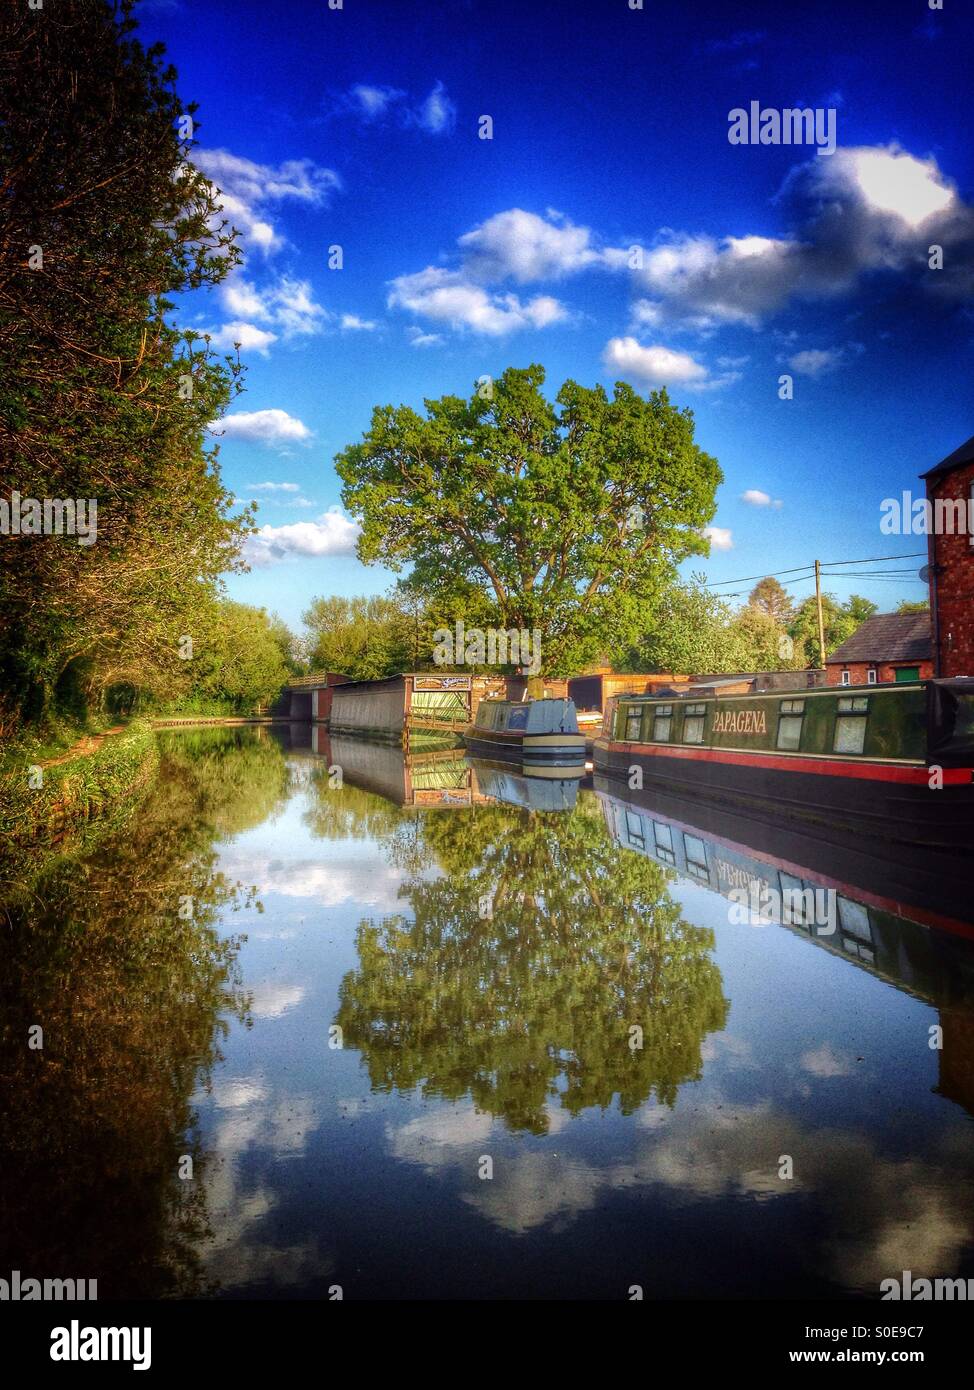 Evening reflections on the Grand Union Canal, Weedon, Northamptonshire, England. Stock Photo